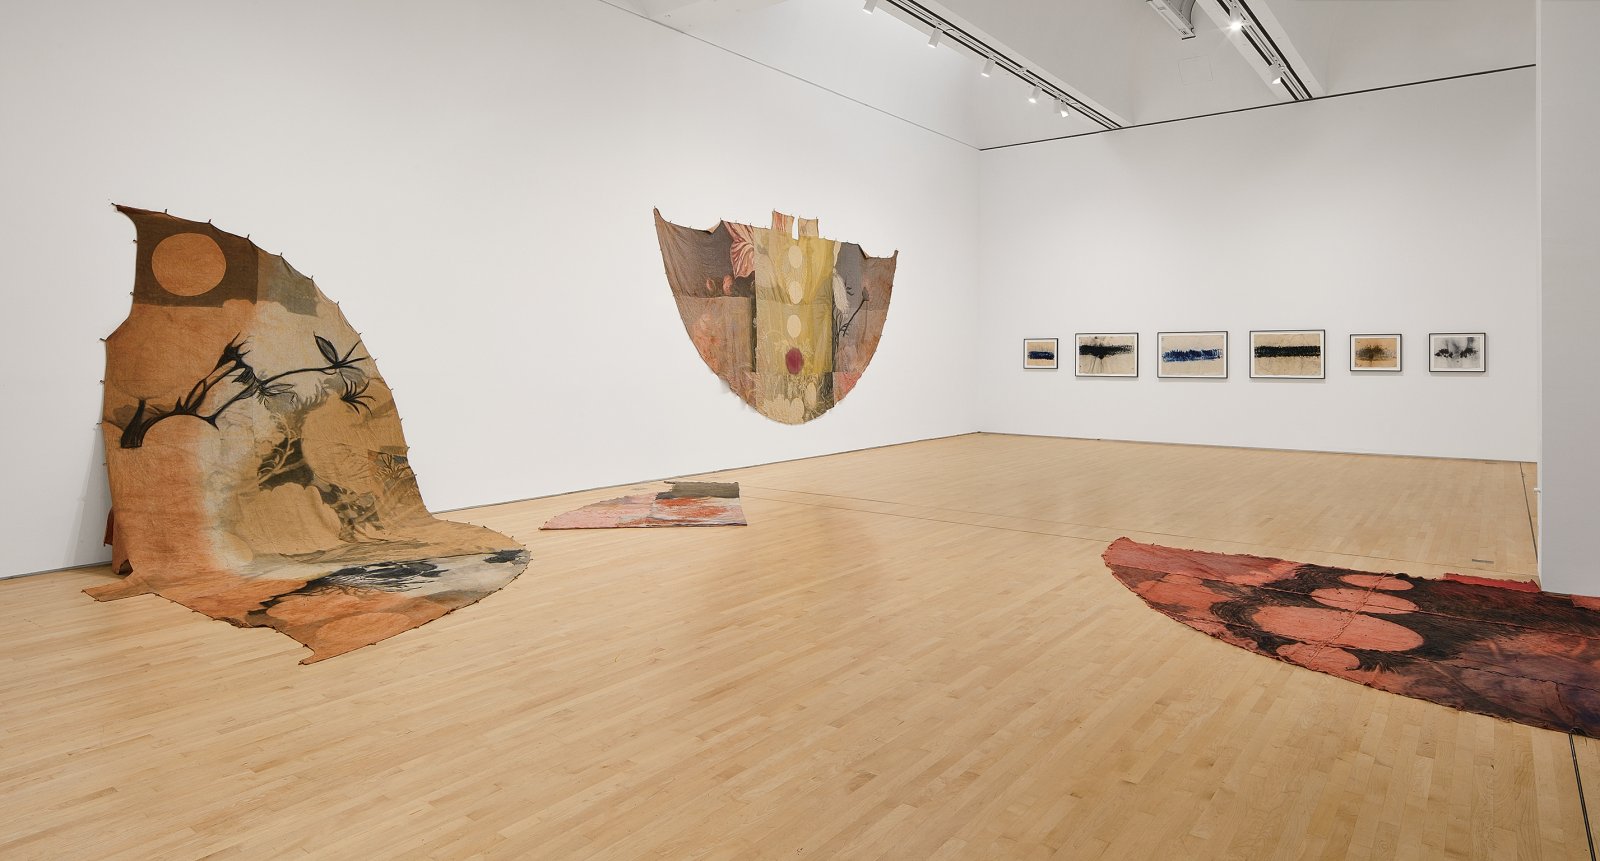 Duane Linklater, can the circle be unbroken 1–5, 2019, digital print on linen, dye, charcoal, mixed media, installation dimensions variable. Installation view, SOFT POWER, SF MOMA, San Francisco, USA, 2019